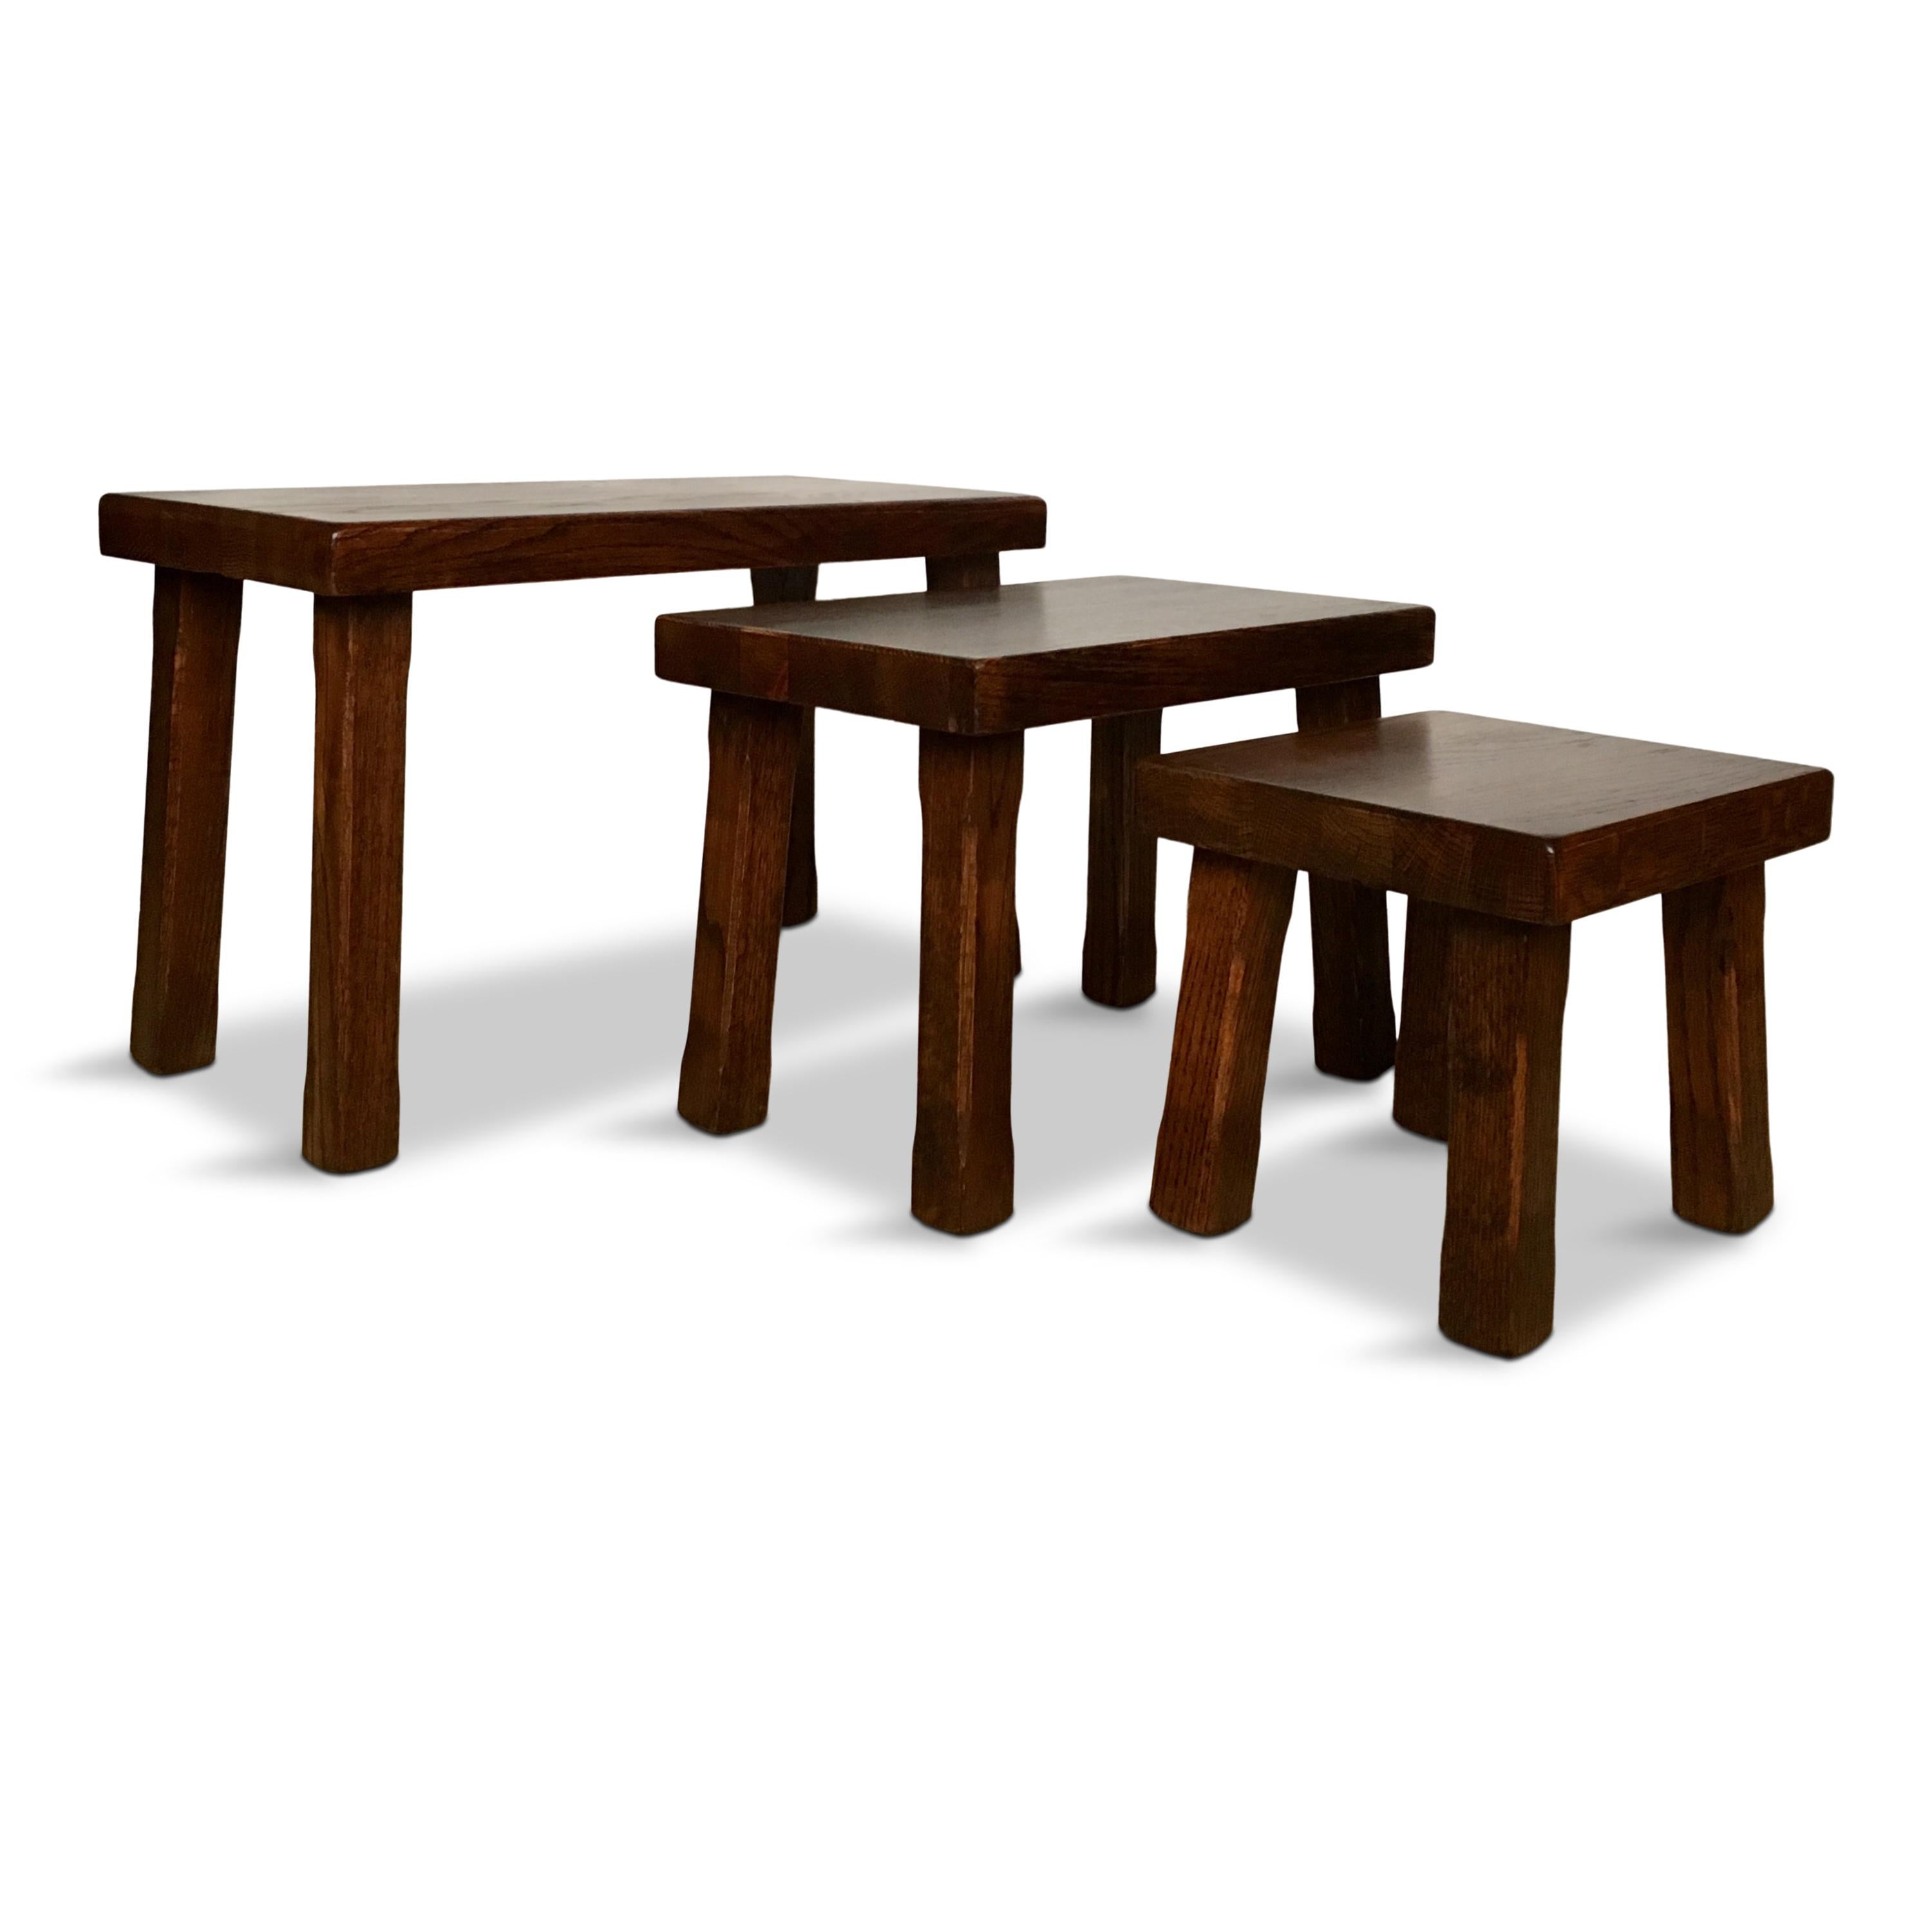 Set of Three Vintage Dutch Solid Oak Nesting Tables or Benches, 1970s In Good Condition For Sale In Riga, Latvia